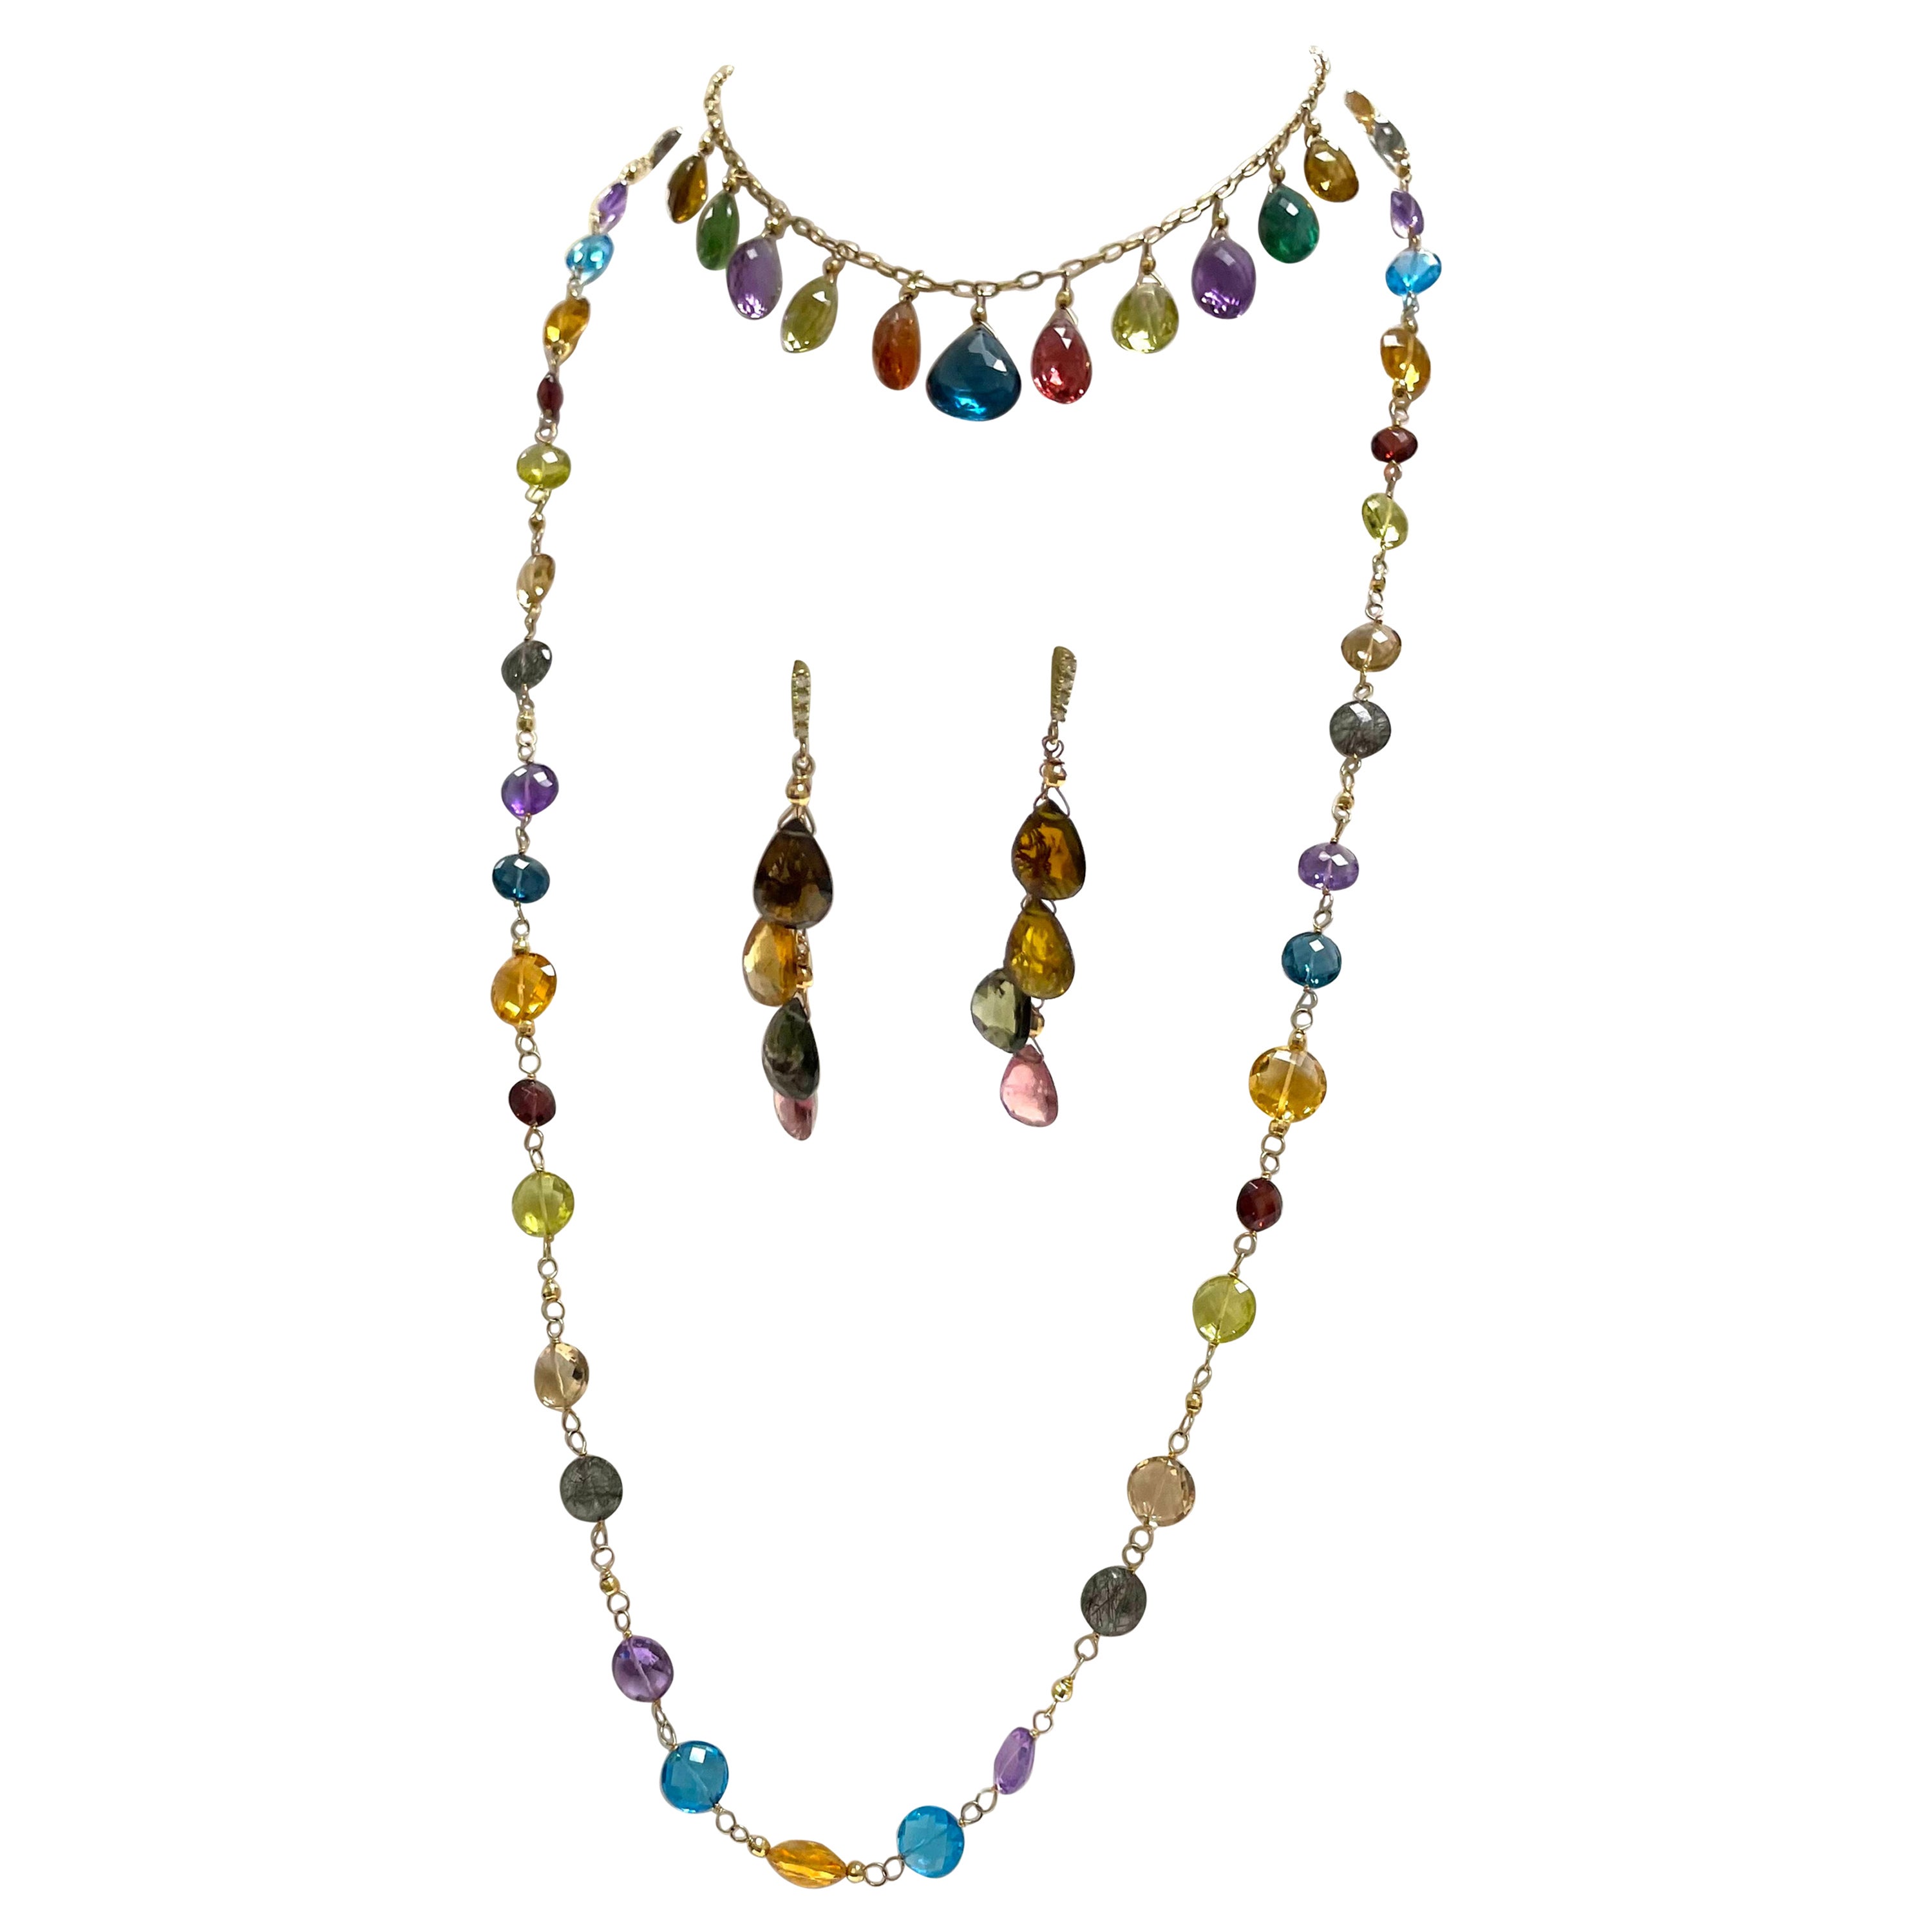 Description
Colorful Tourmaline adorned with a 14k yellow gold faceted ball playfully dangle from a chain suspended from a diamond post.
Item #E1900
Make a statement by adding a matching stunning short necklace (Item # N2272 $6,300) and long